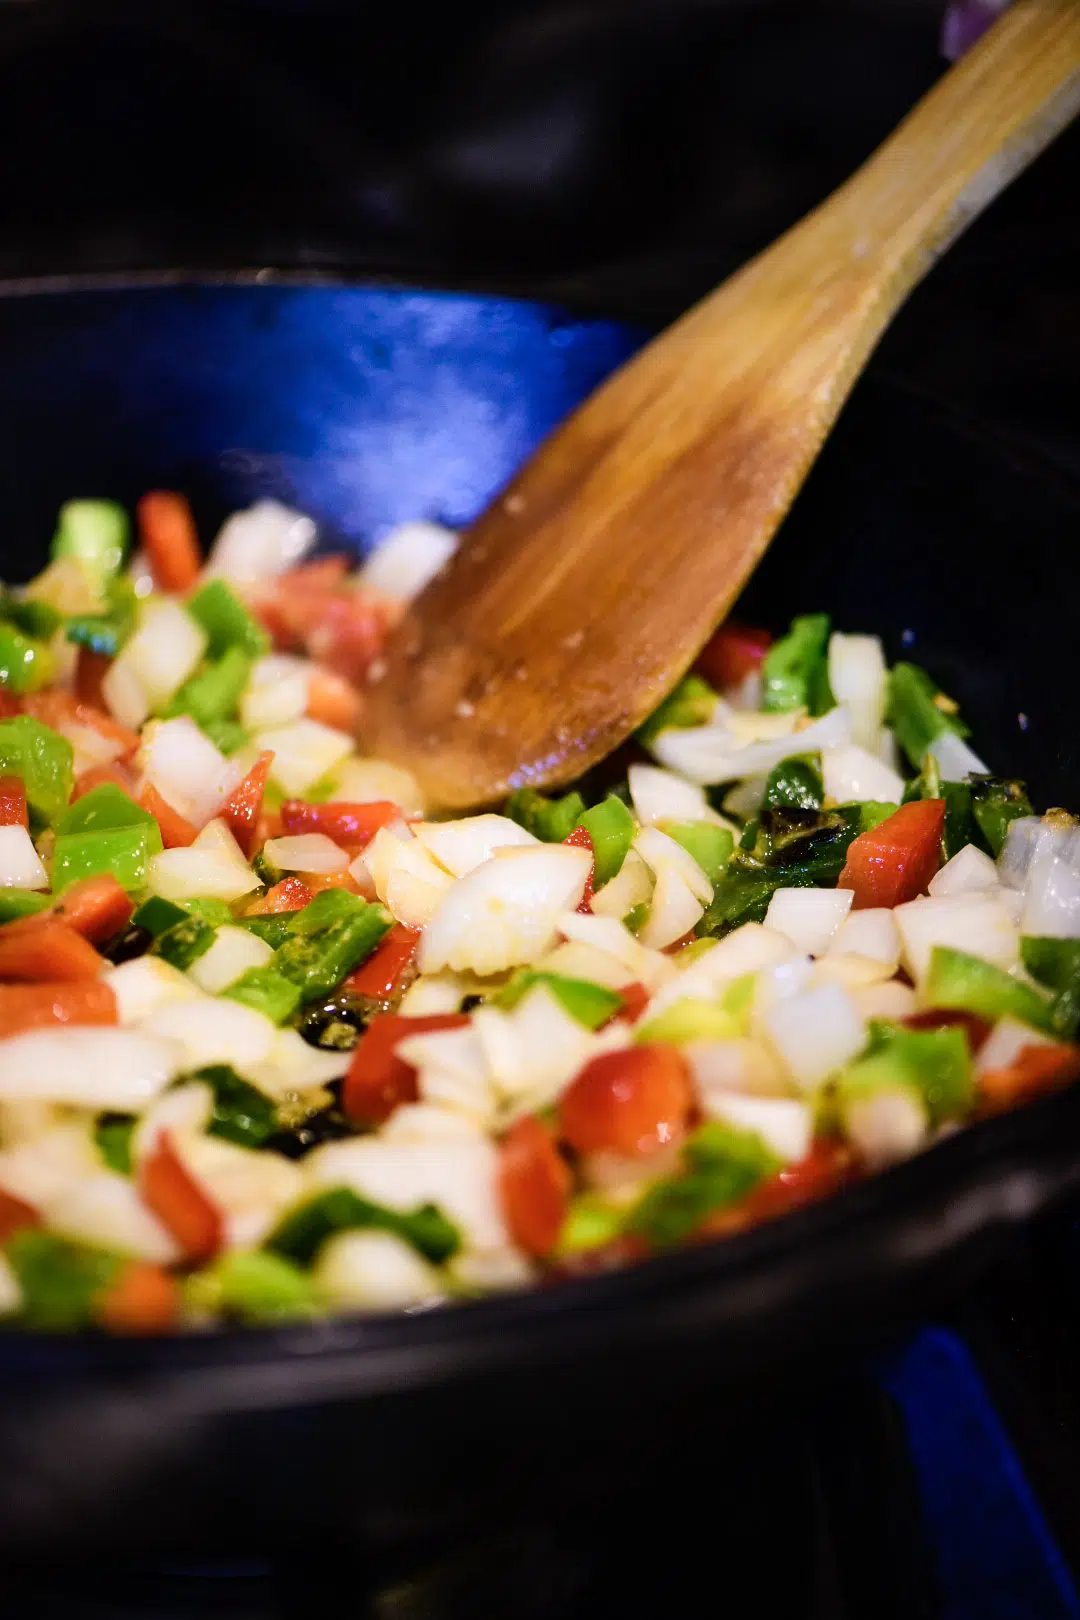 Sauteing vegetables in cast iron skillet